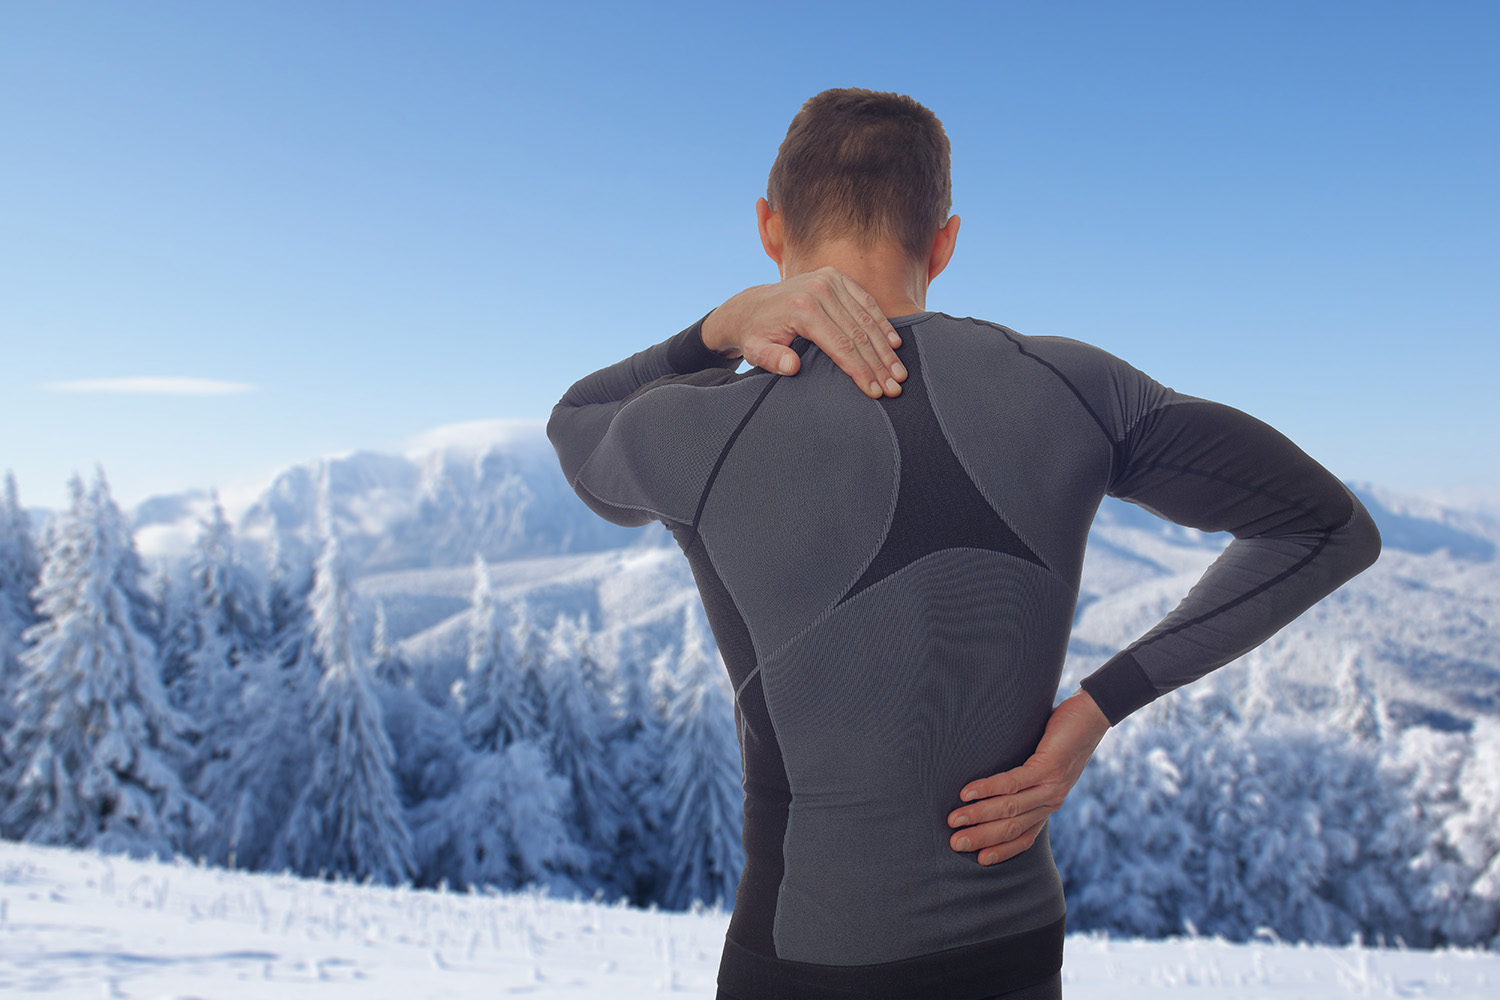 Reducing Neck and Shoulder Pain: Easy Ways to Feel Better